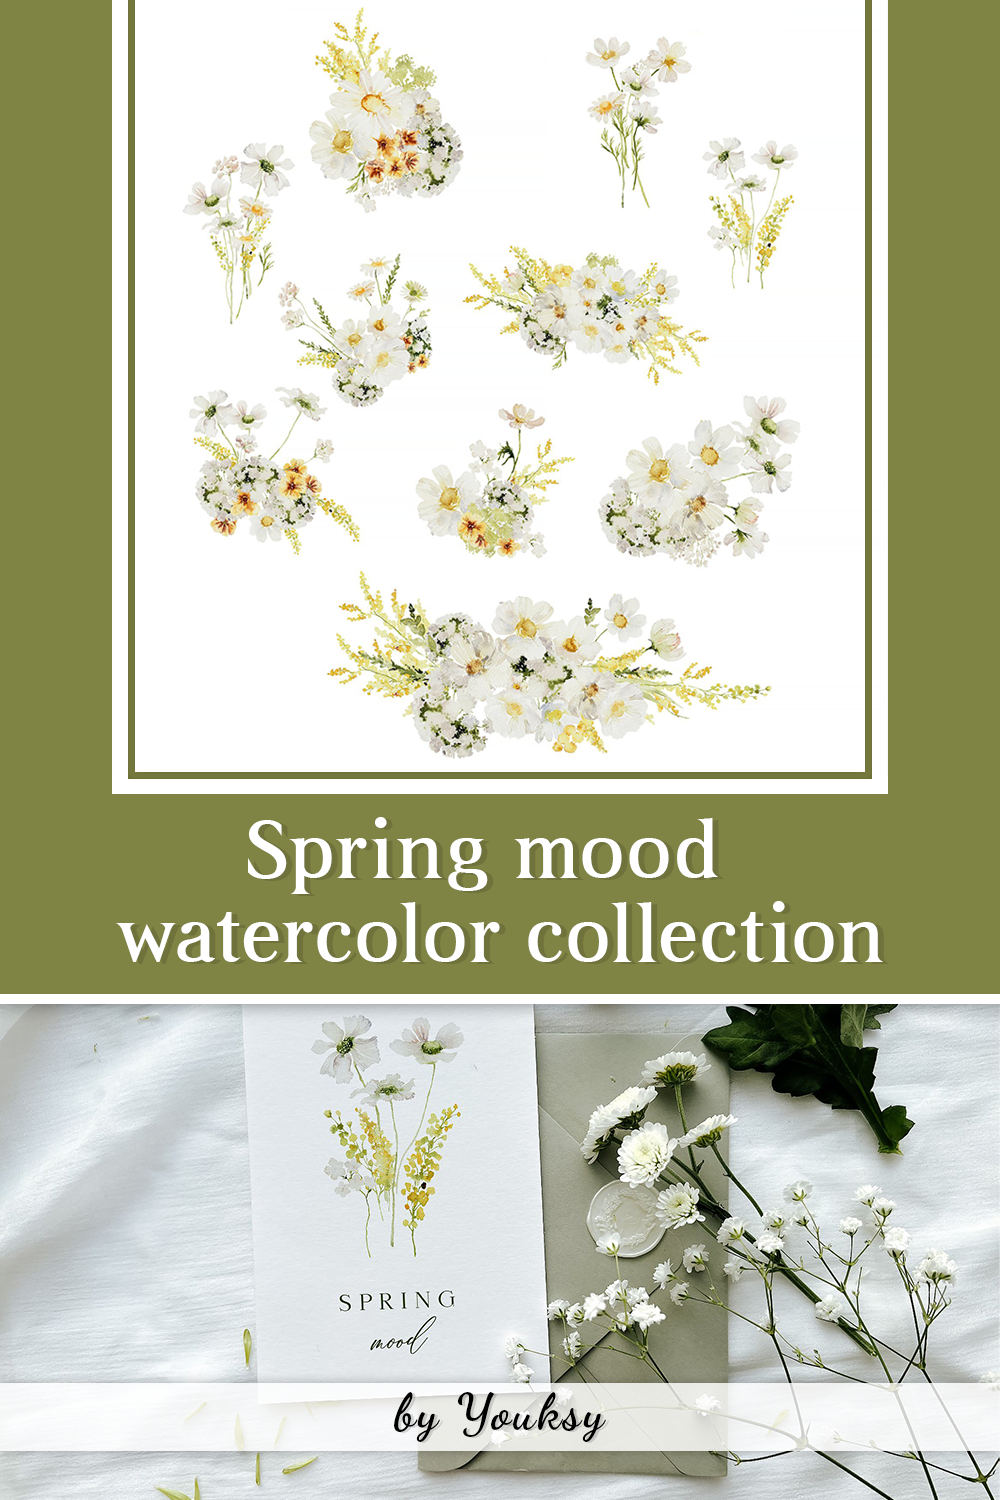 Spring mood watercolor collection of pinterest.